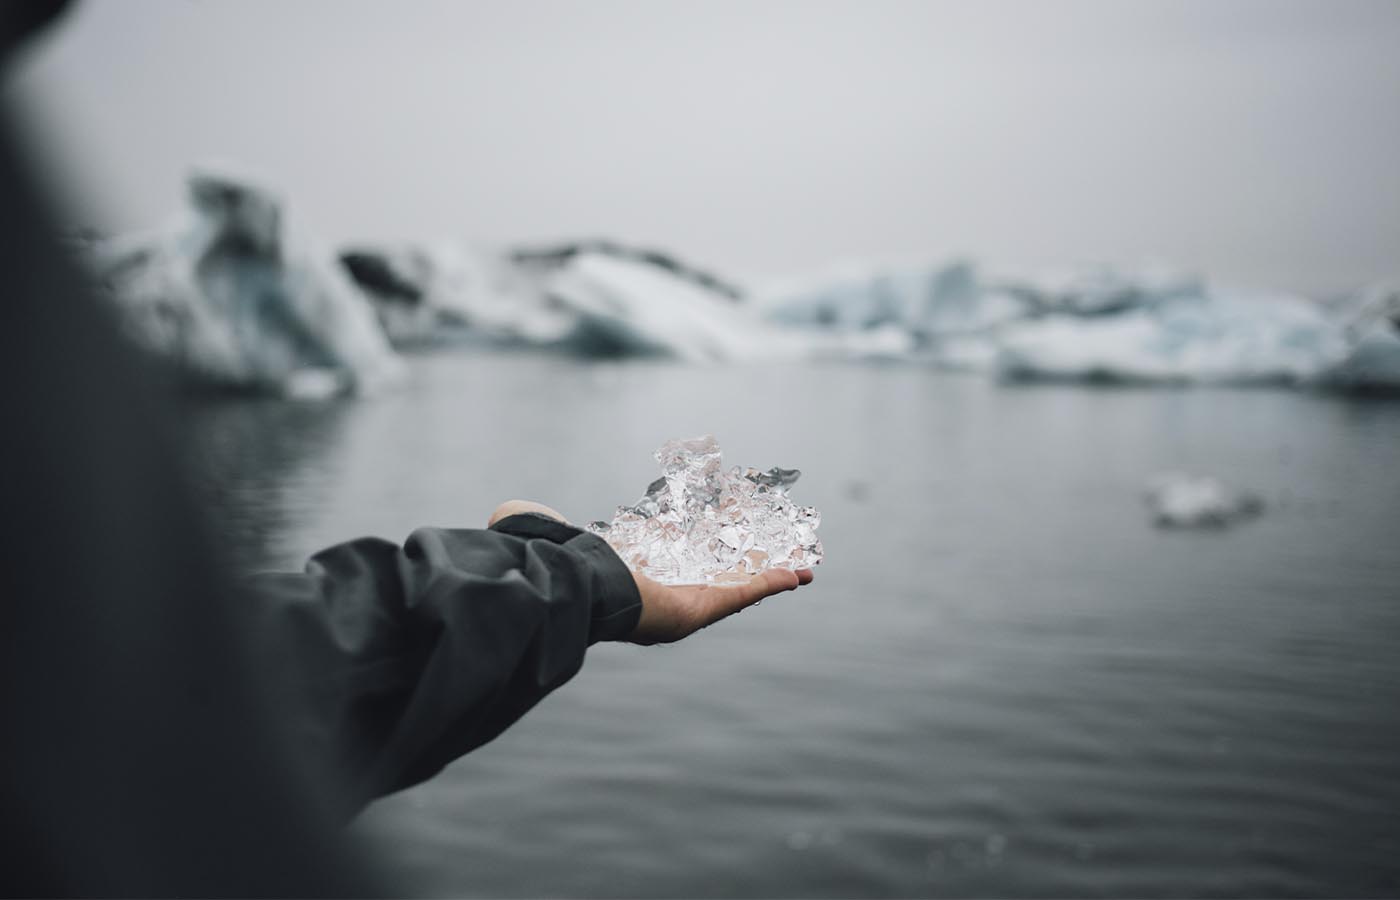 A person wearing a spray jacket holding ice in their hand in front of a lake